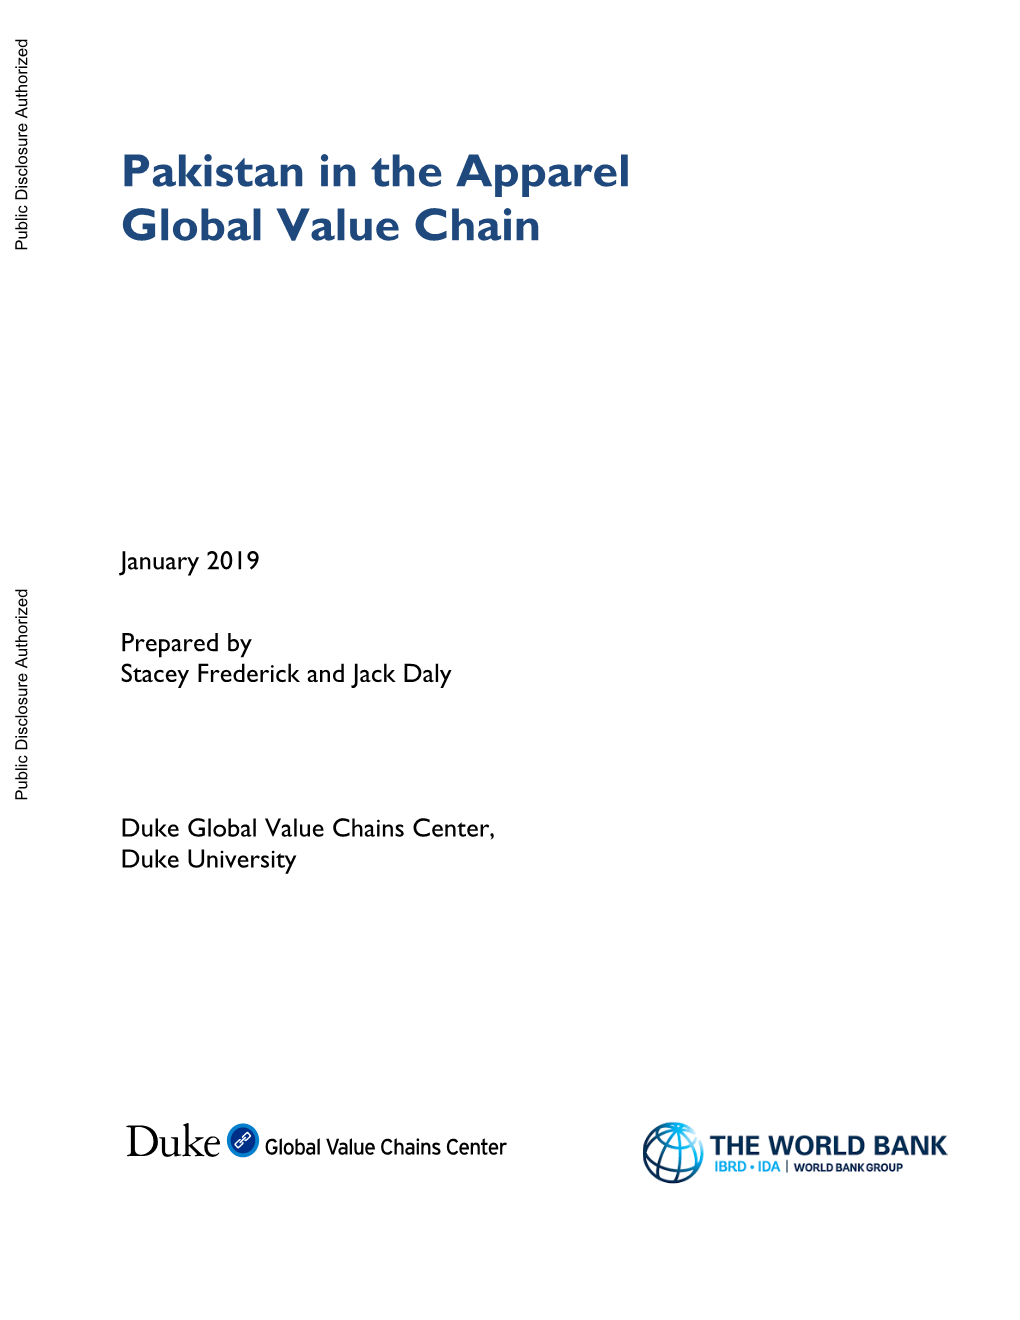 Pakistan in the Apparel Global Value Chain